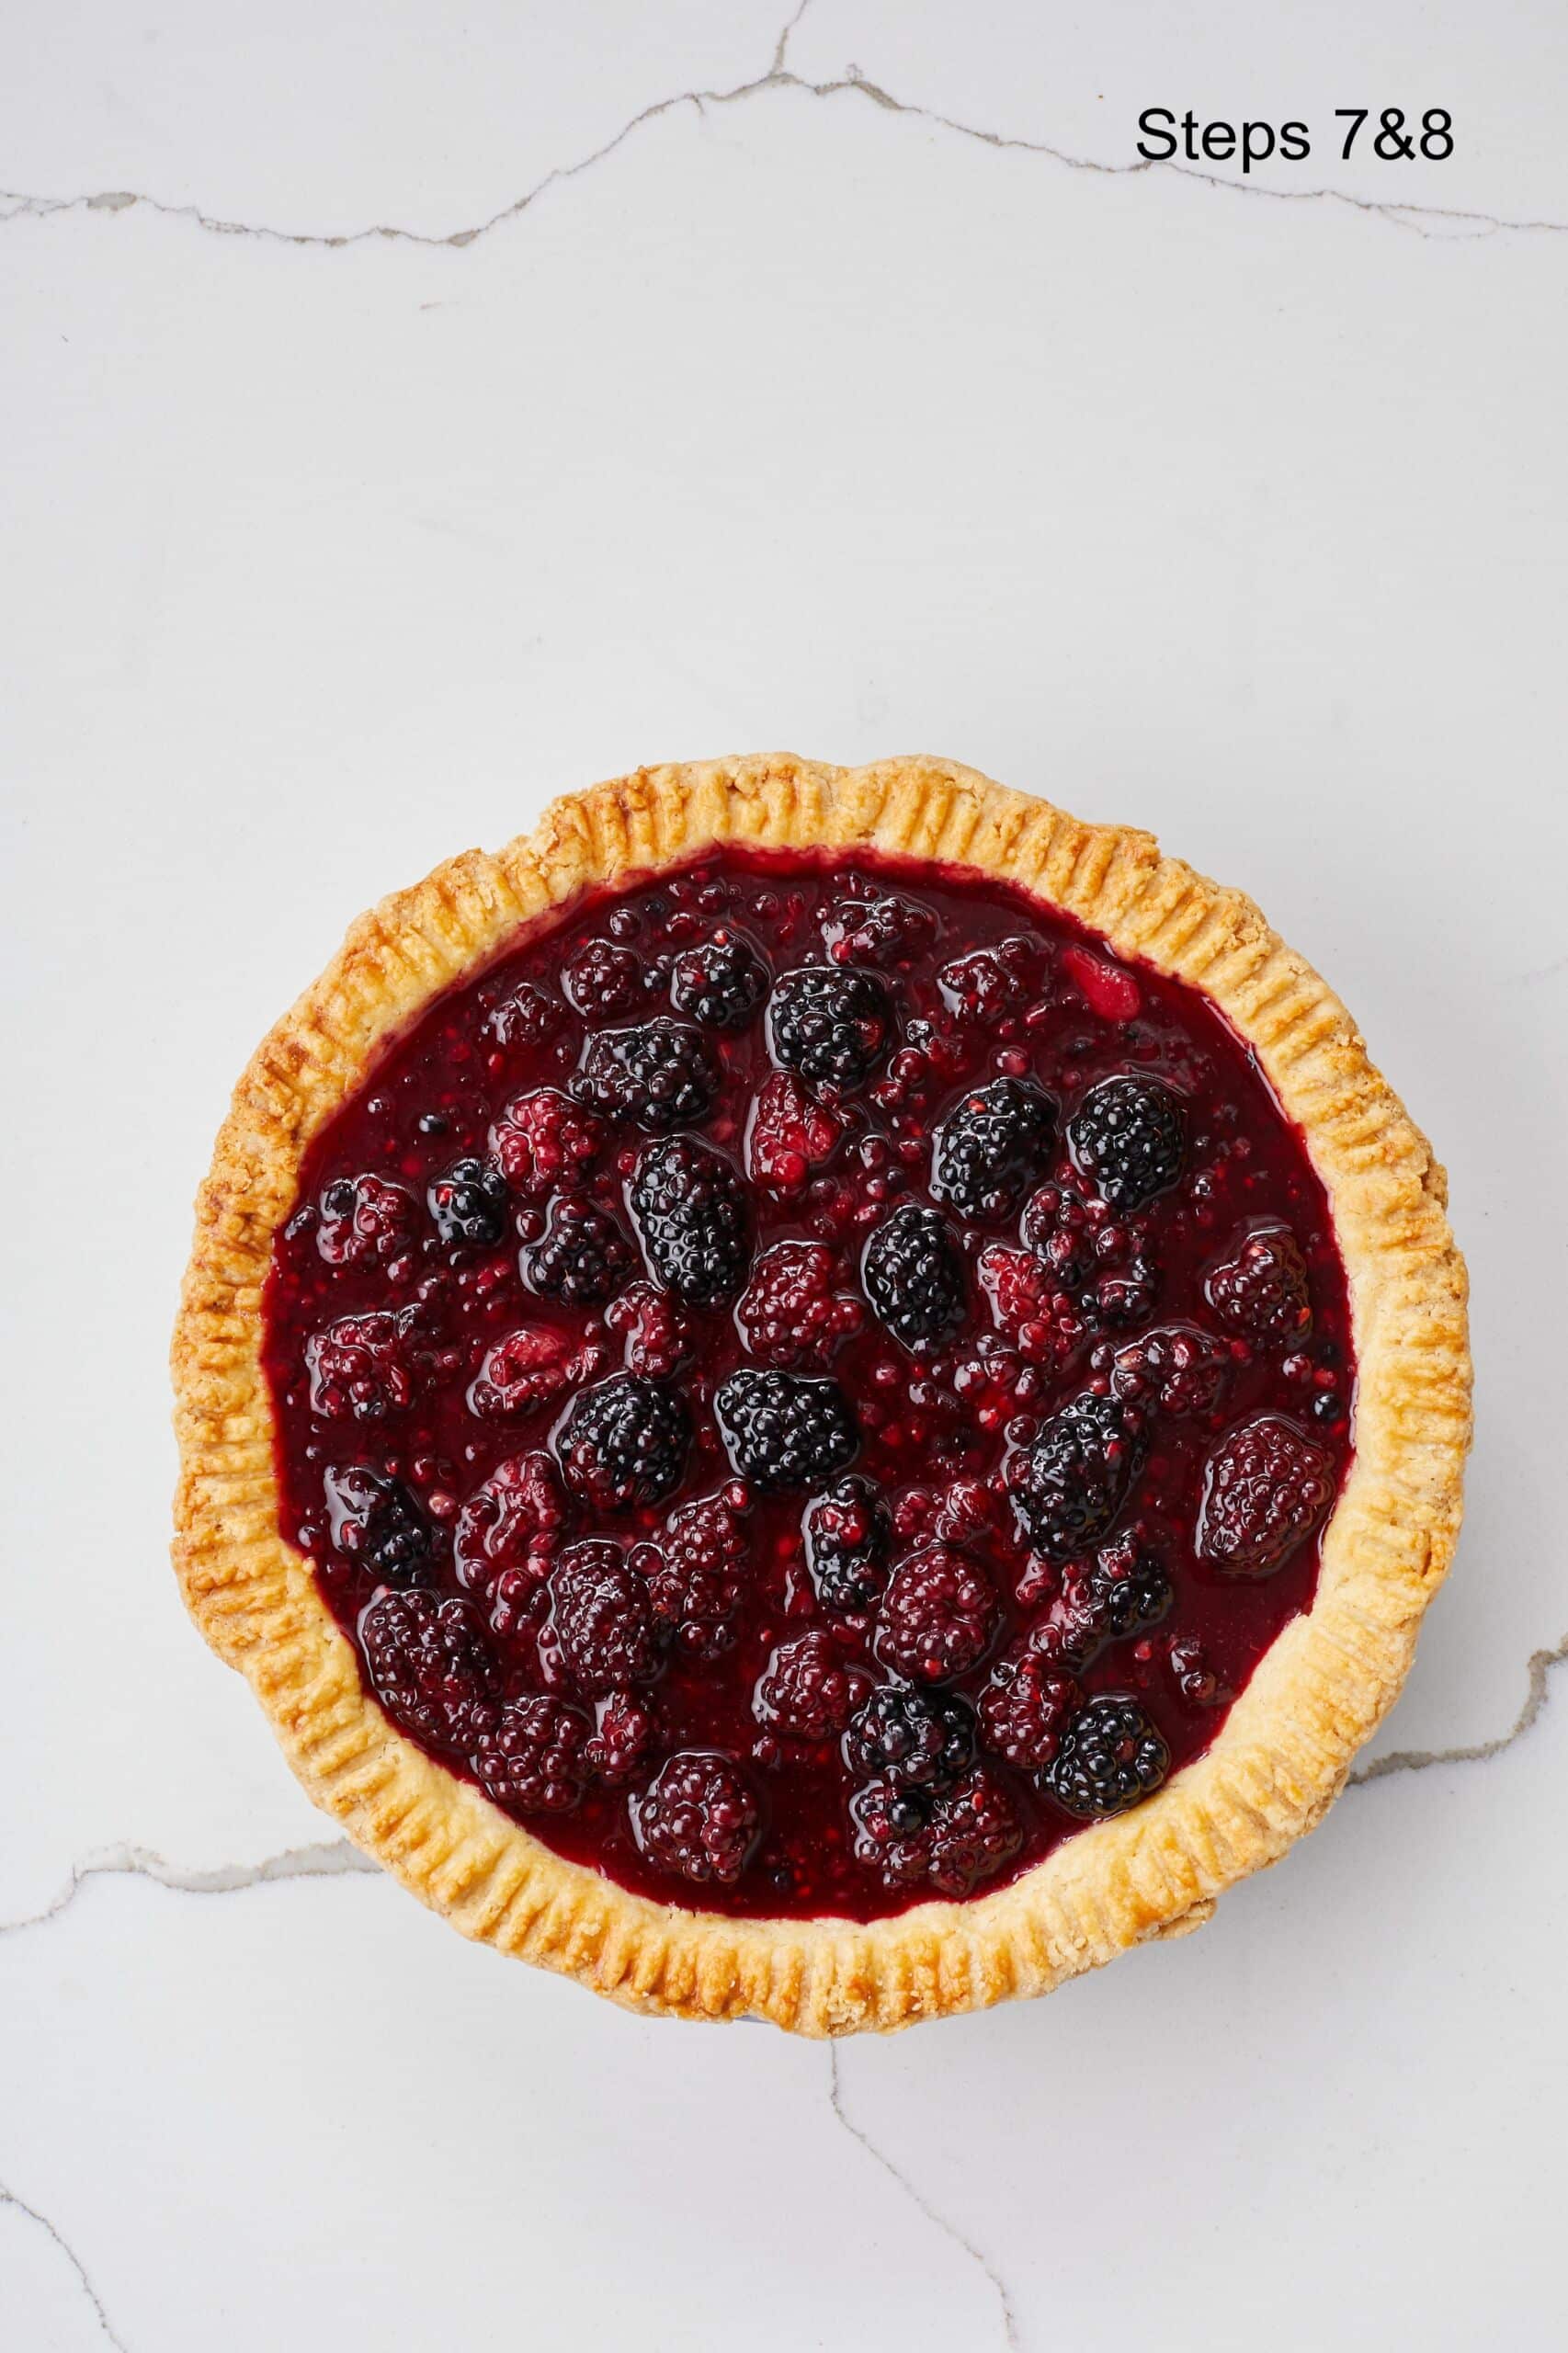 Assemble the pie: Pour the filling into the pre-baked pie crust. Let set at room temperature for 3 hours before serving.